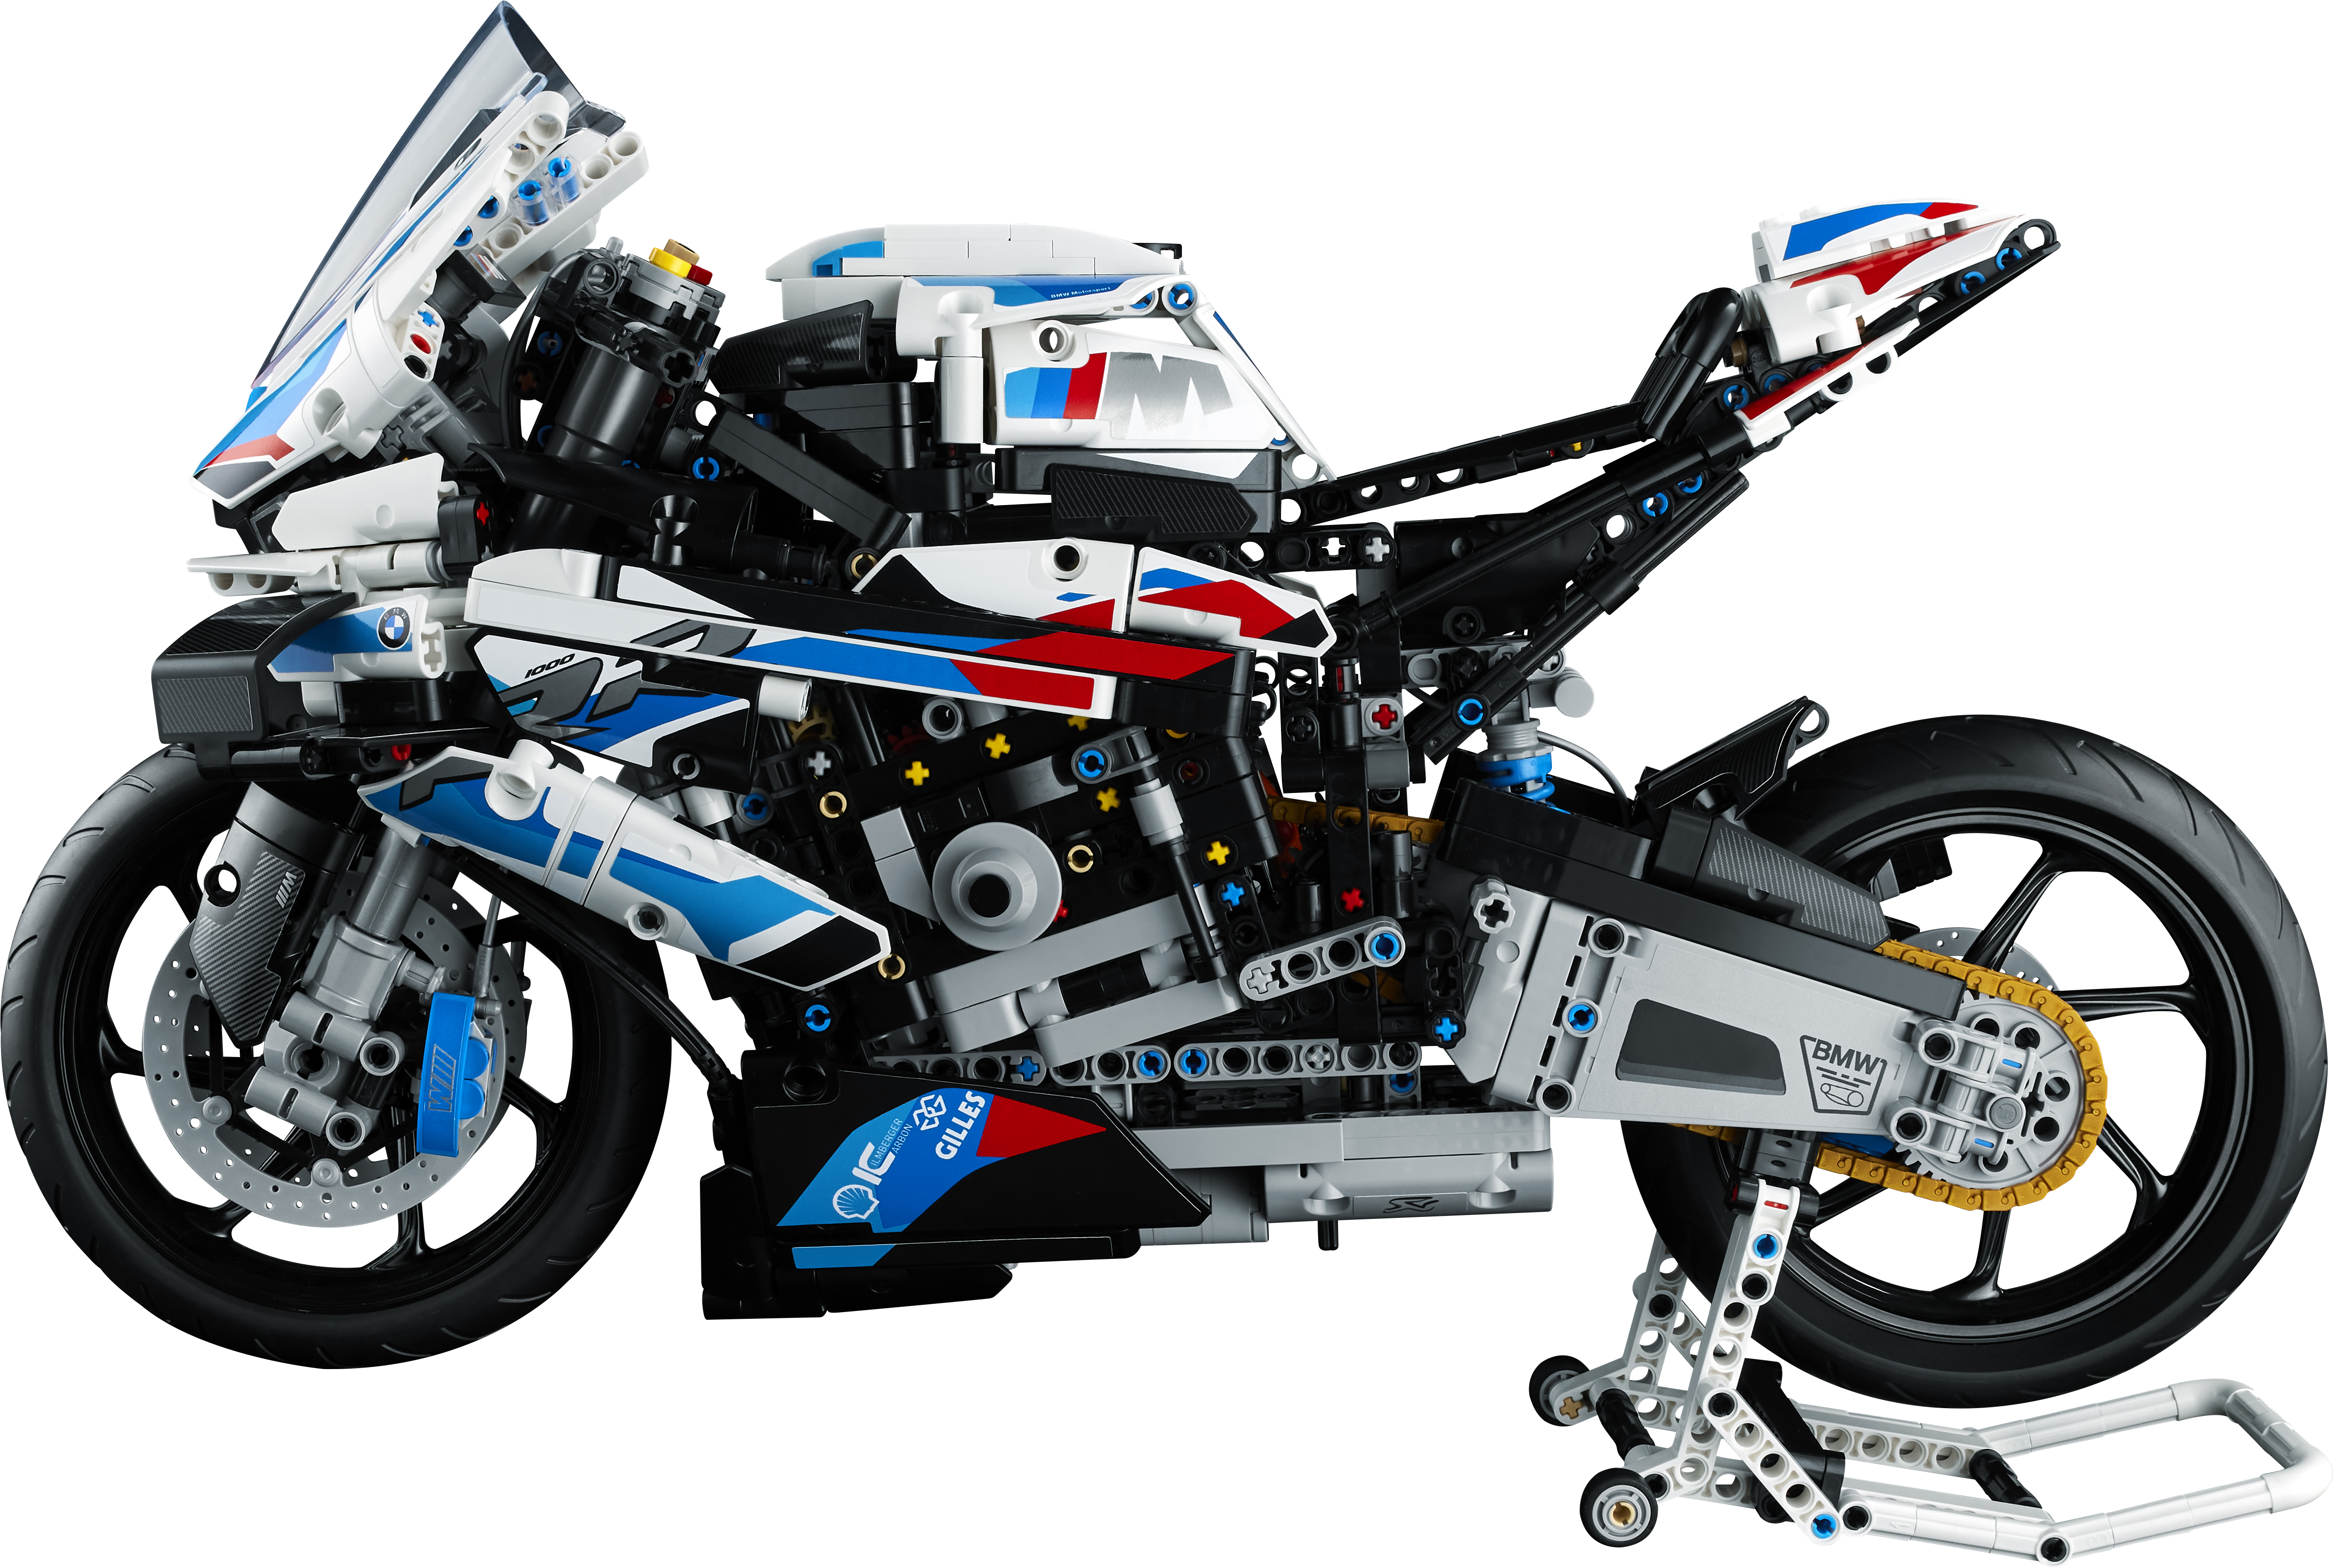 How we made the LEGO® Technic™ BMW M 1000 RR just like the real thing